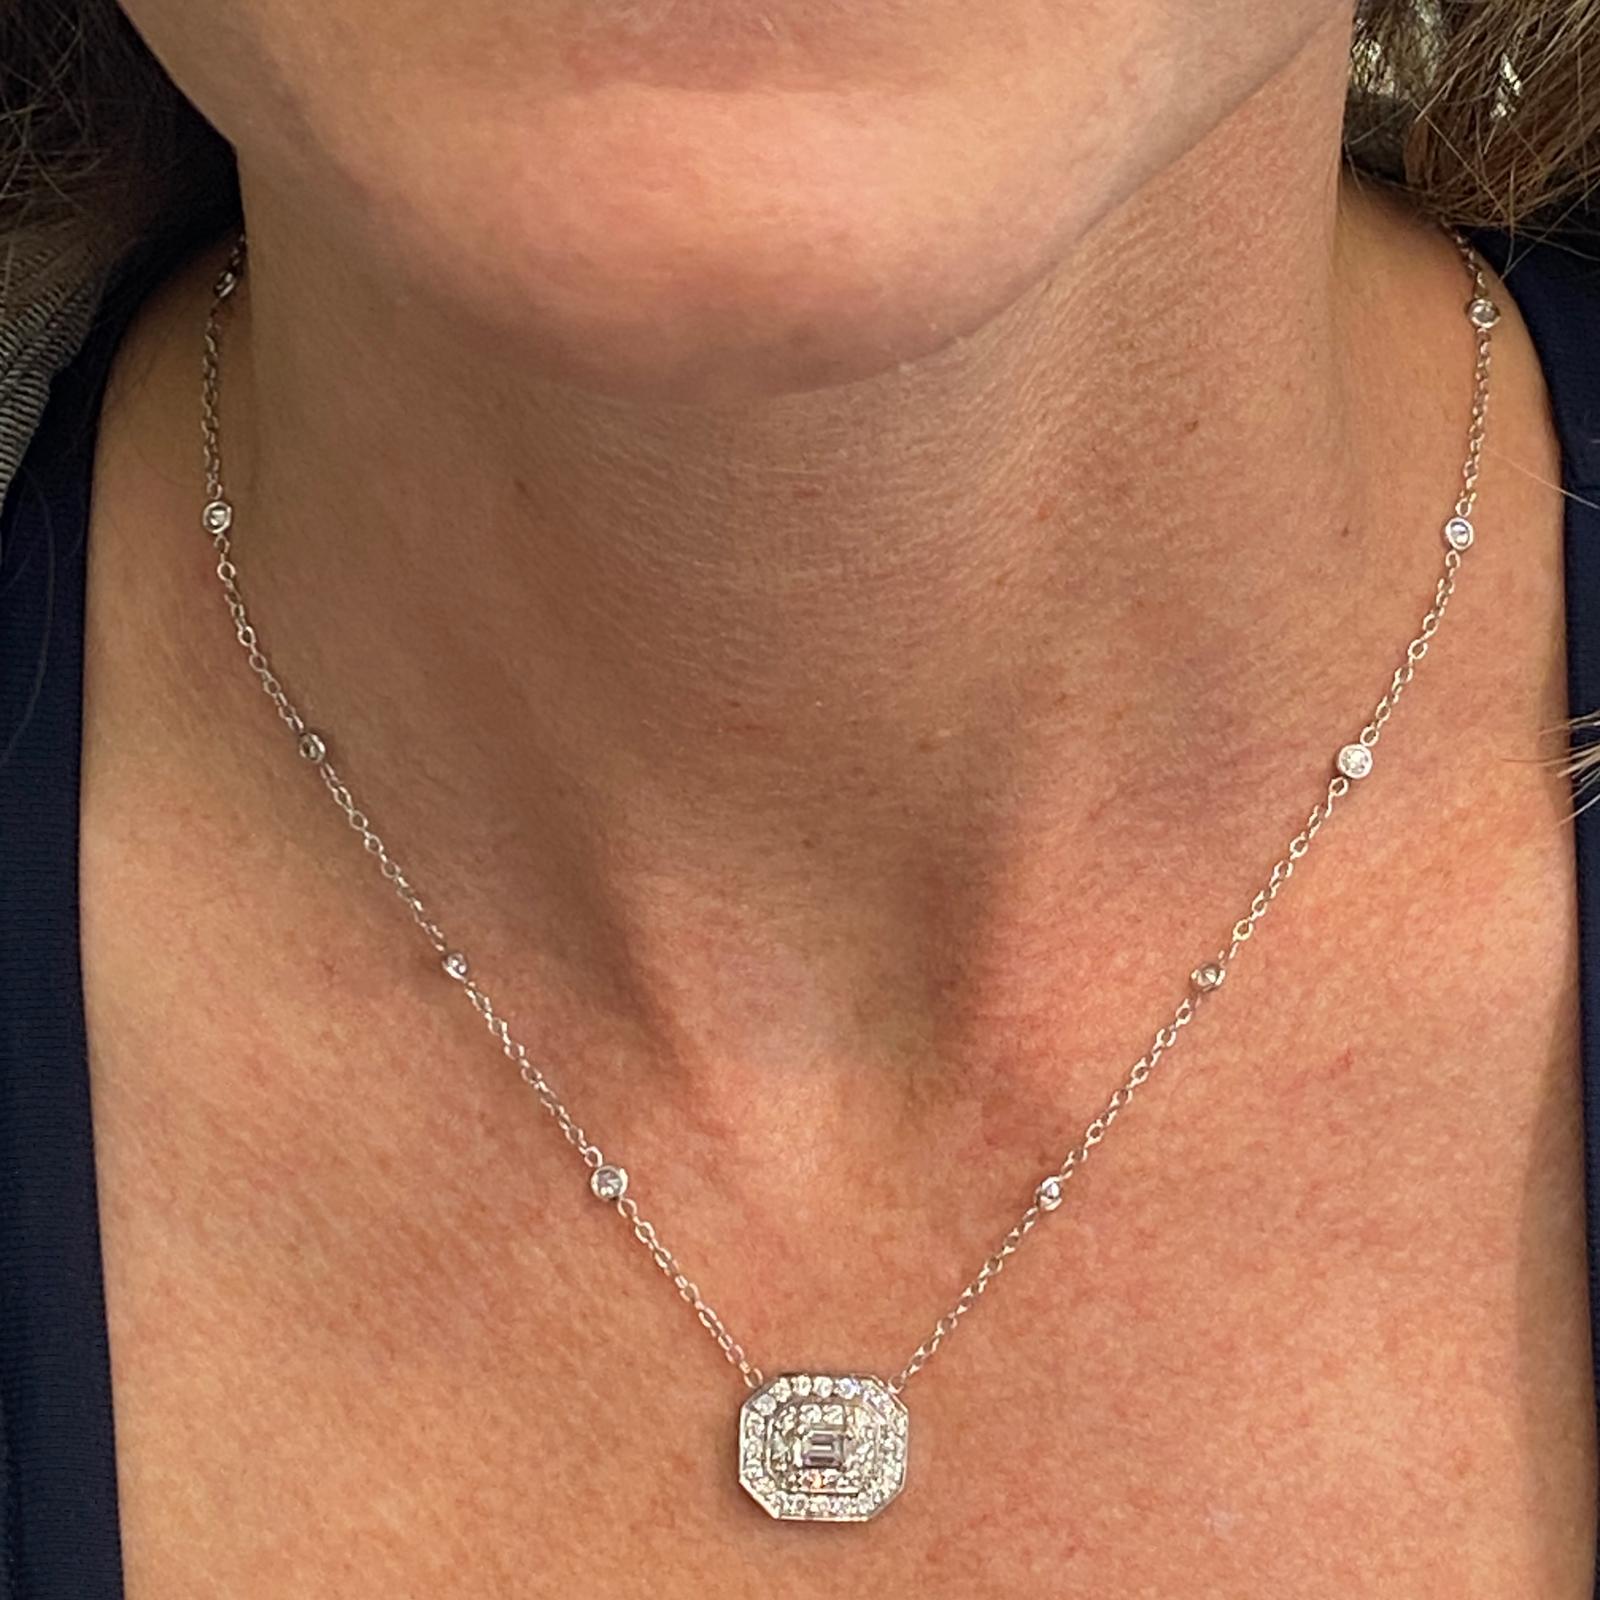 Emerald cut diamond pendant necklace by designer Penny Preville fashioned in 18 karat white gold. The pendant features an emerald cut diamond weighing approximately .26 carats surrounded by round brilliant cut diamonds weighing 1.25 carat total